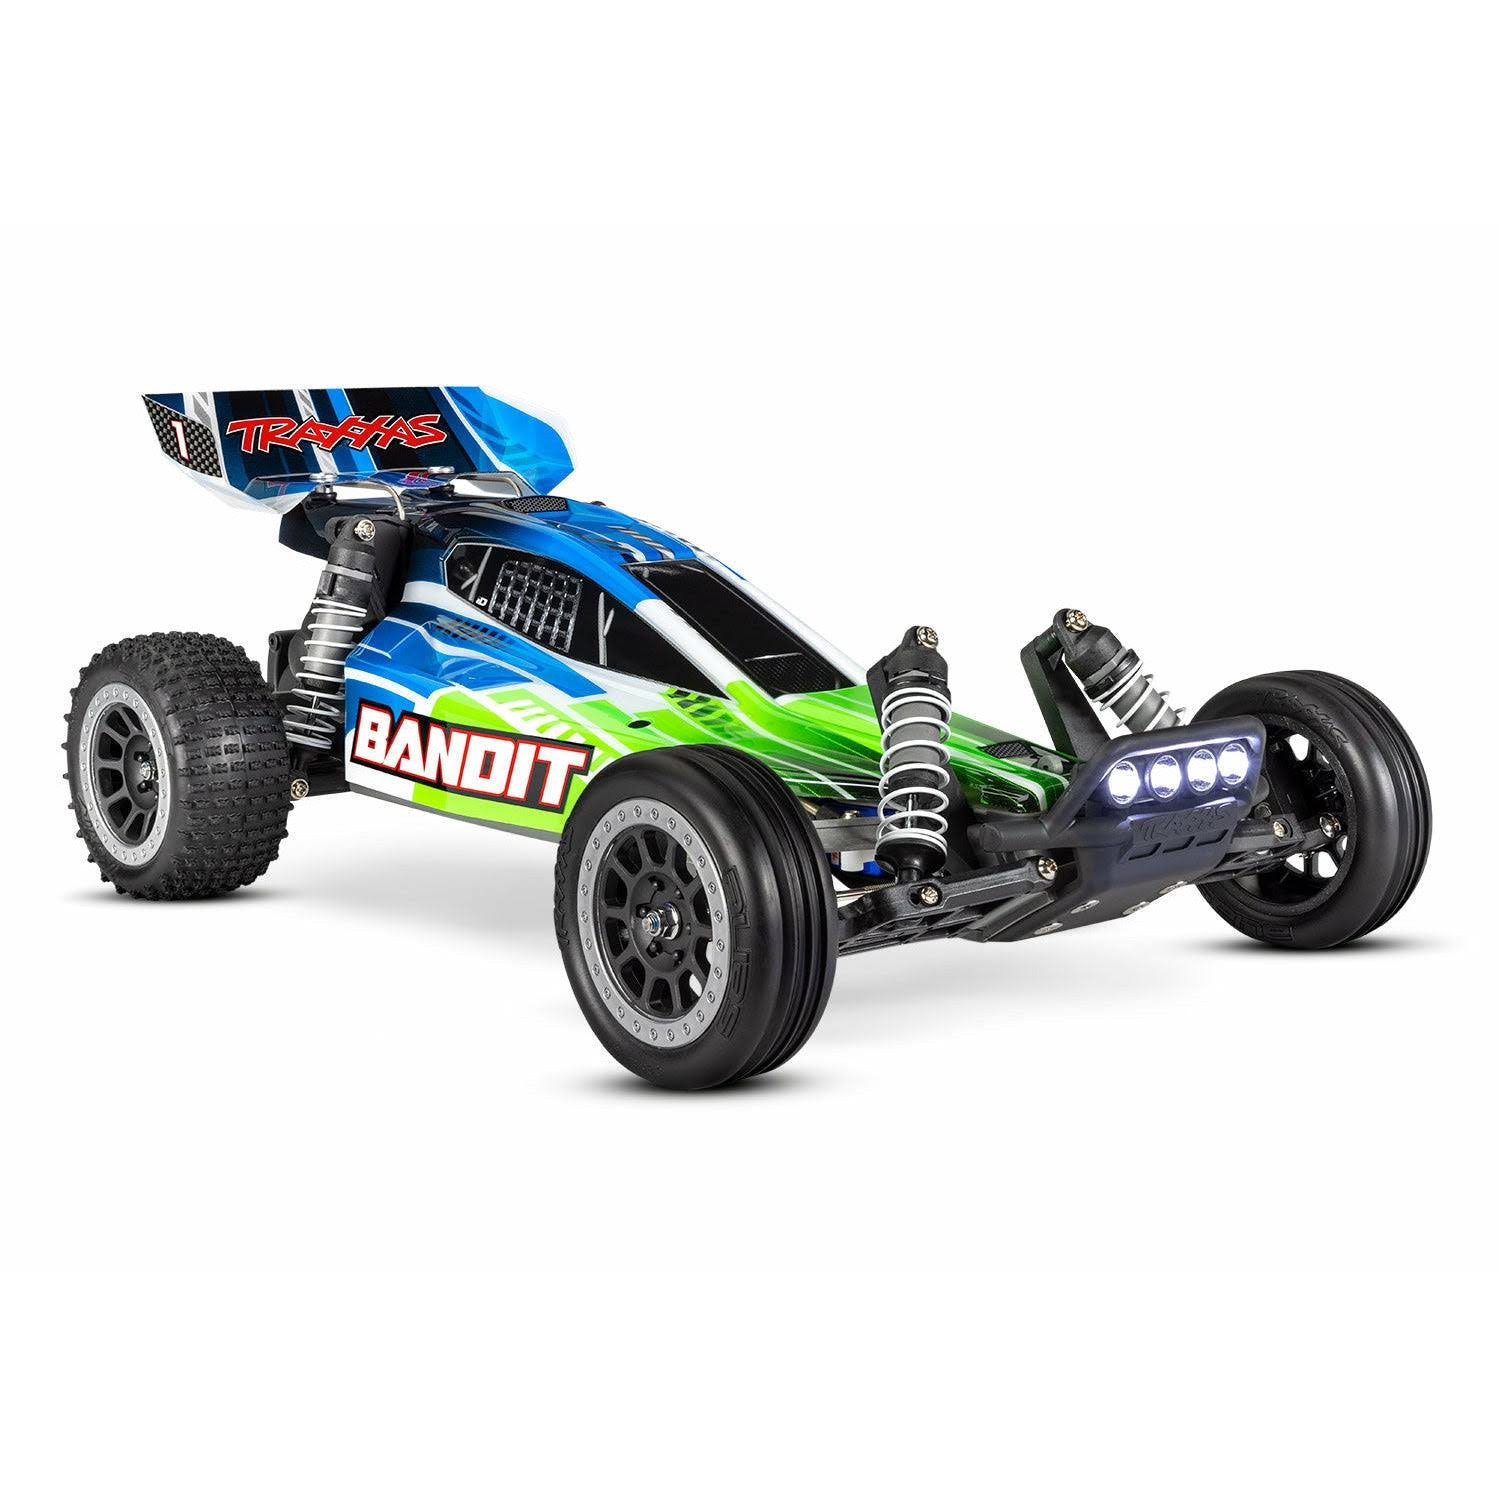 Traxxas Bandit 1/10 RTR with LED Light Kit Green